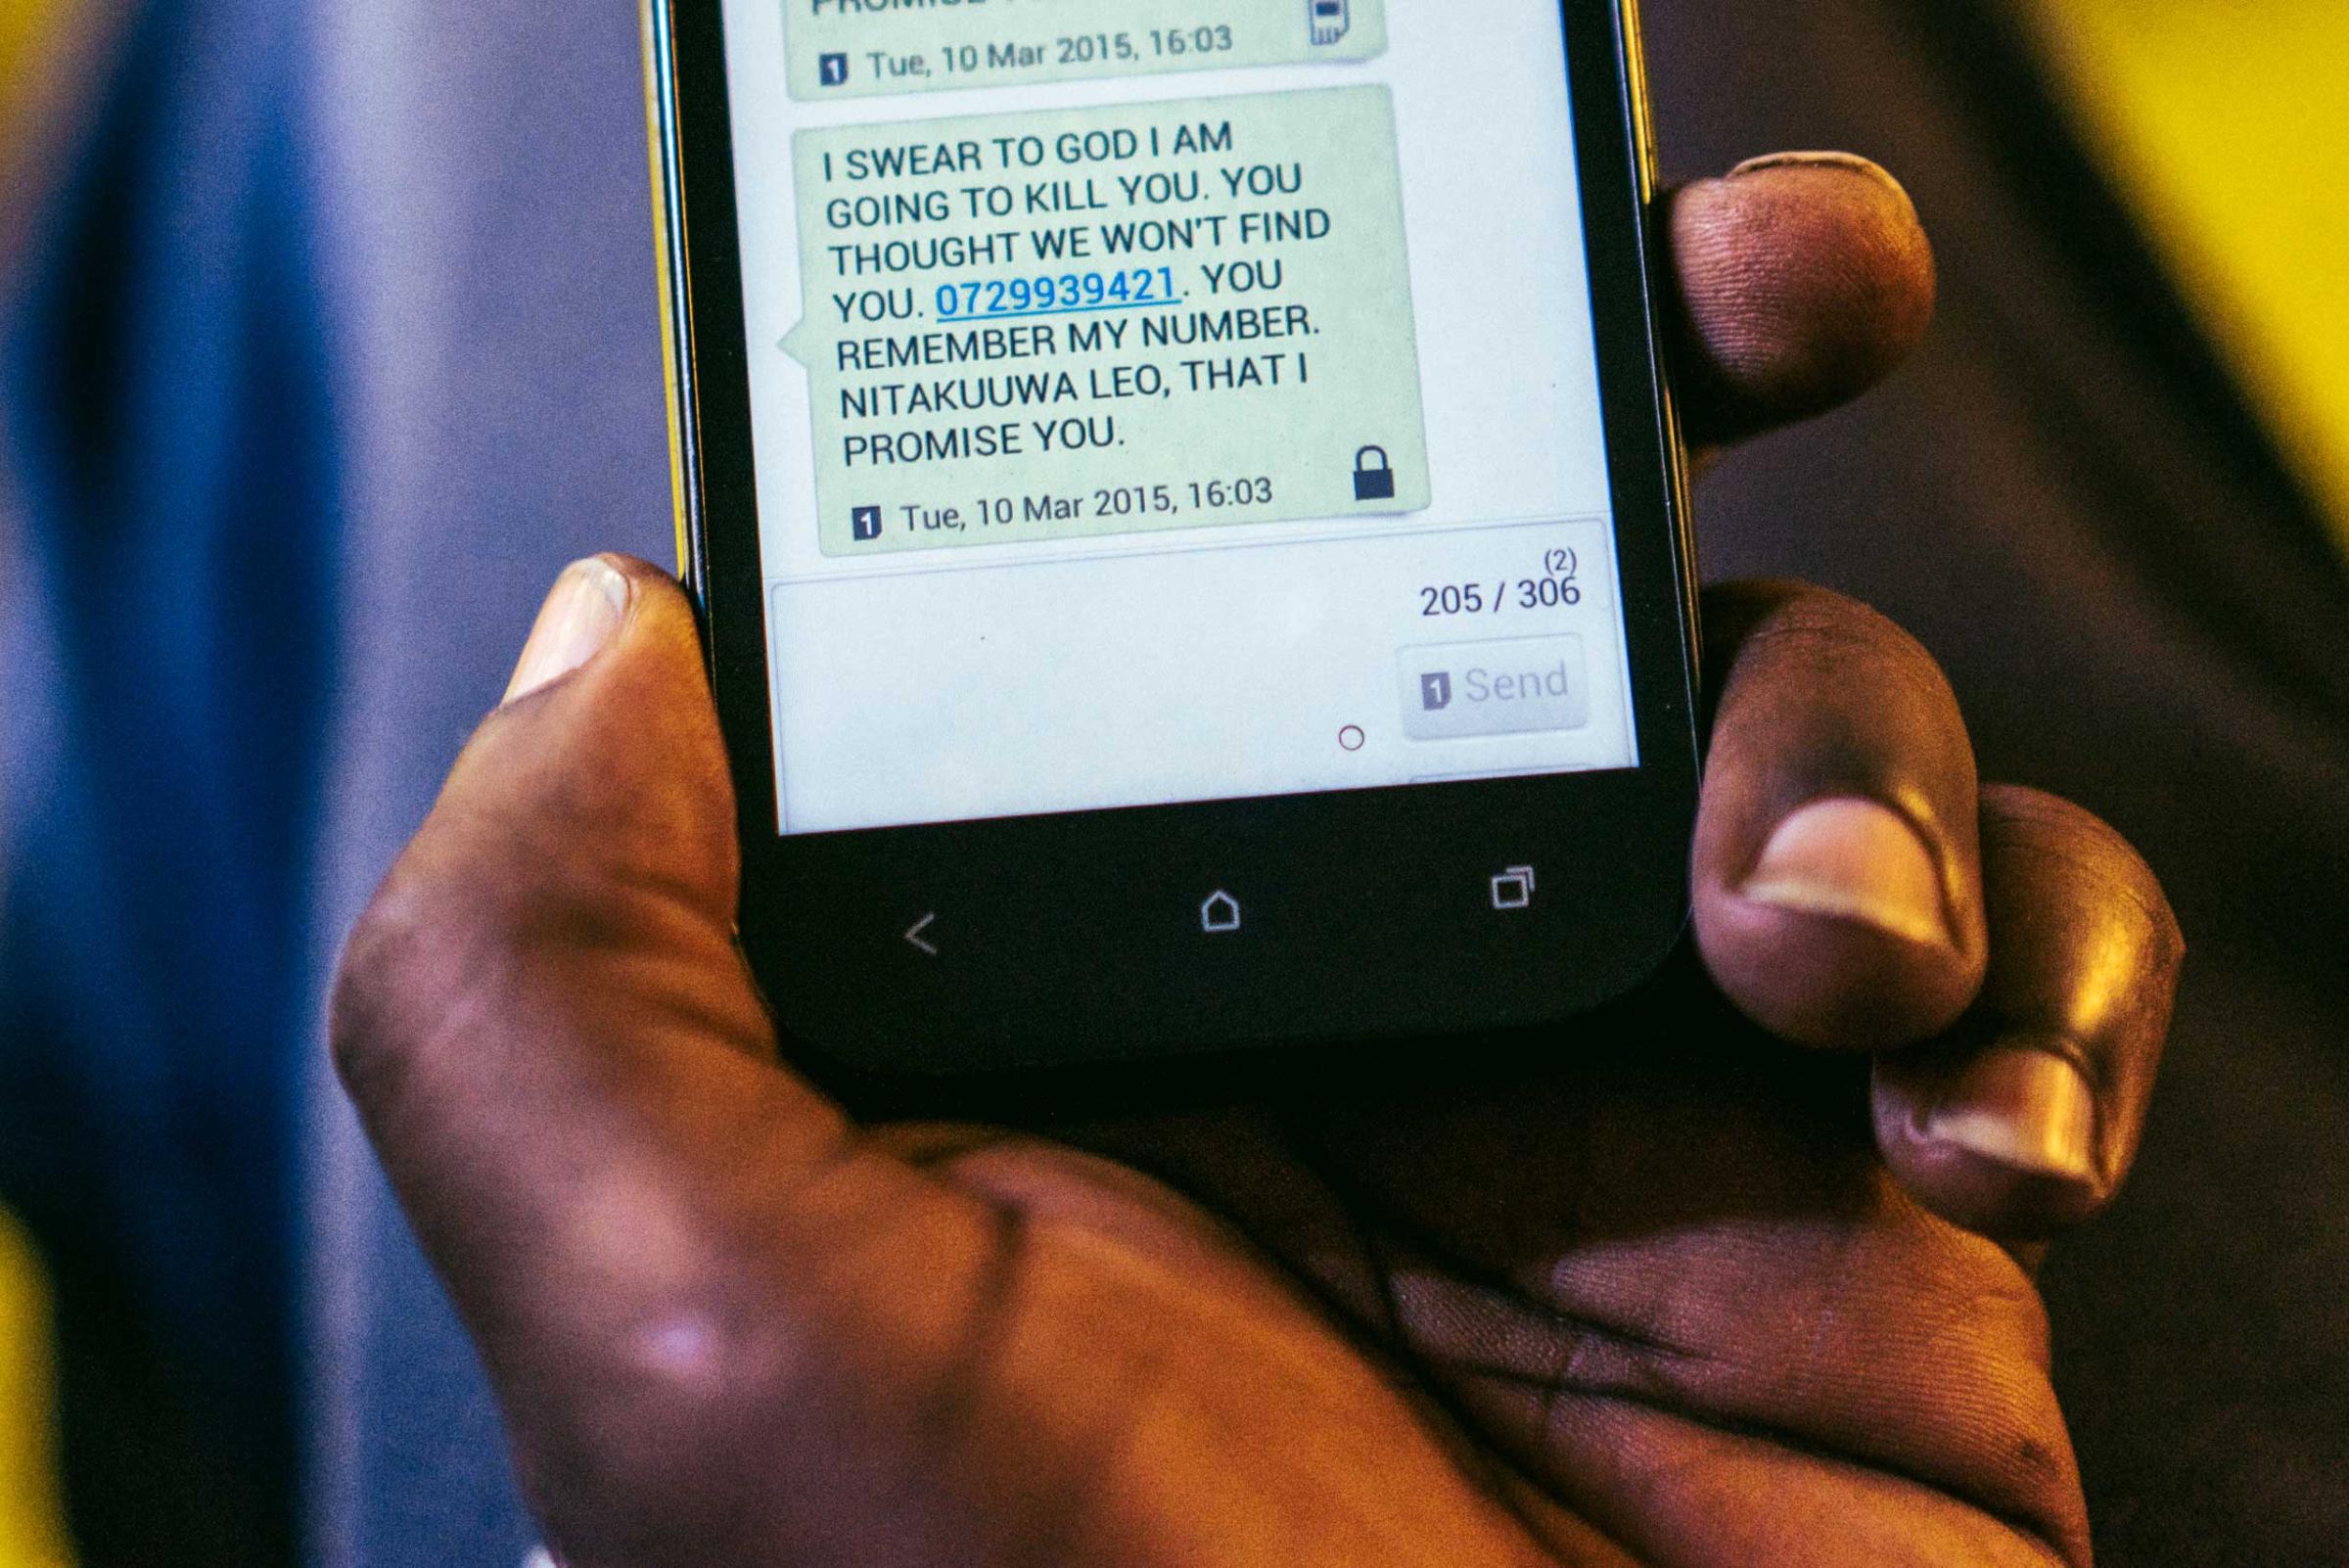 A text message a gay refugee from Uganda received from an unknown number soon after he arrived in Kenya. The sender threatened to kill him that same day, and so he went into hiding. Because he is unsure who sent the message, he lived in constant fear. He has since been resettled in the United States.